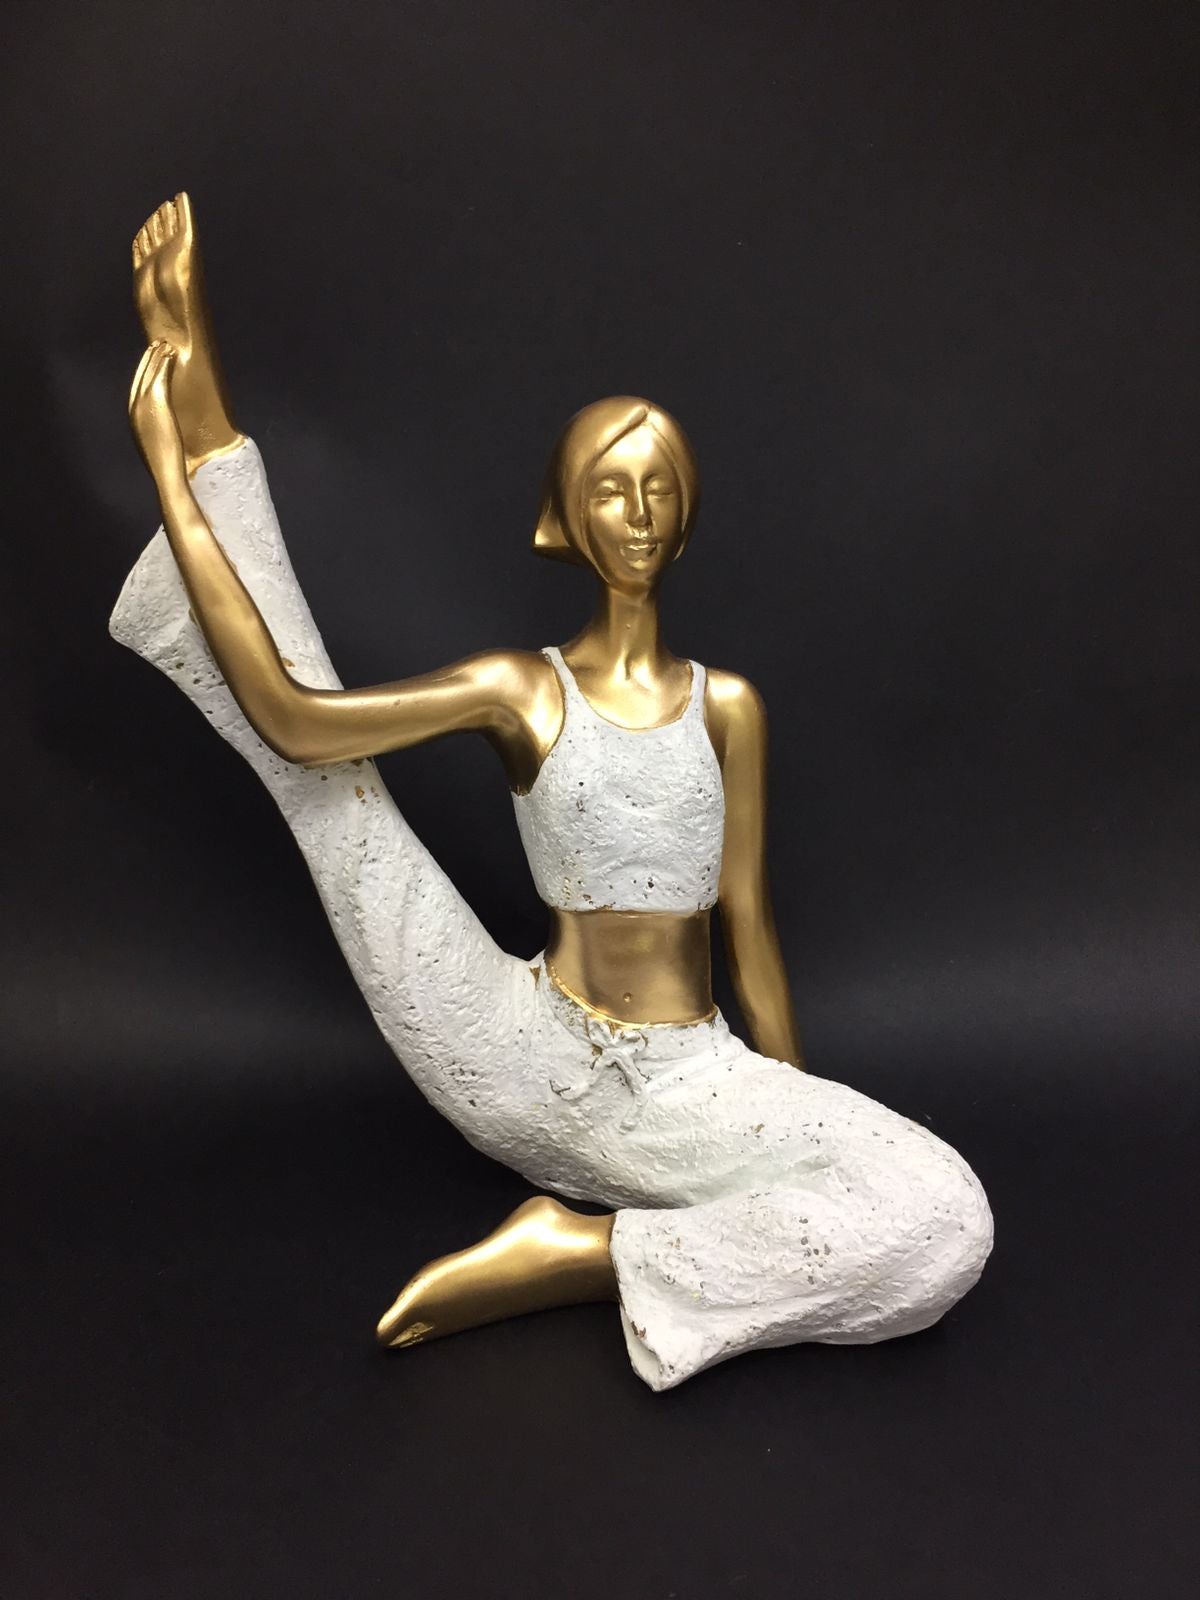 Yoga Figurines Modern Art Stunning Décor Dazzling Creation Only At Tamrapatra